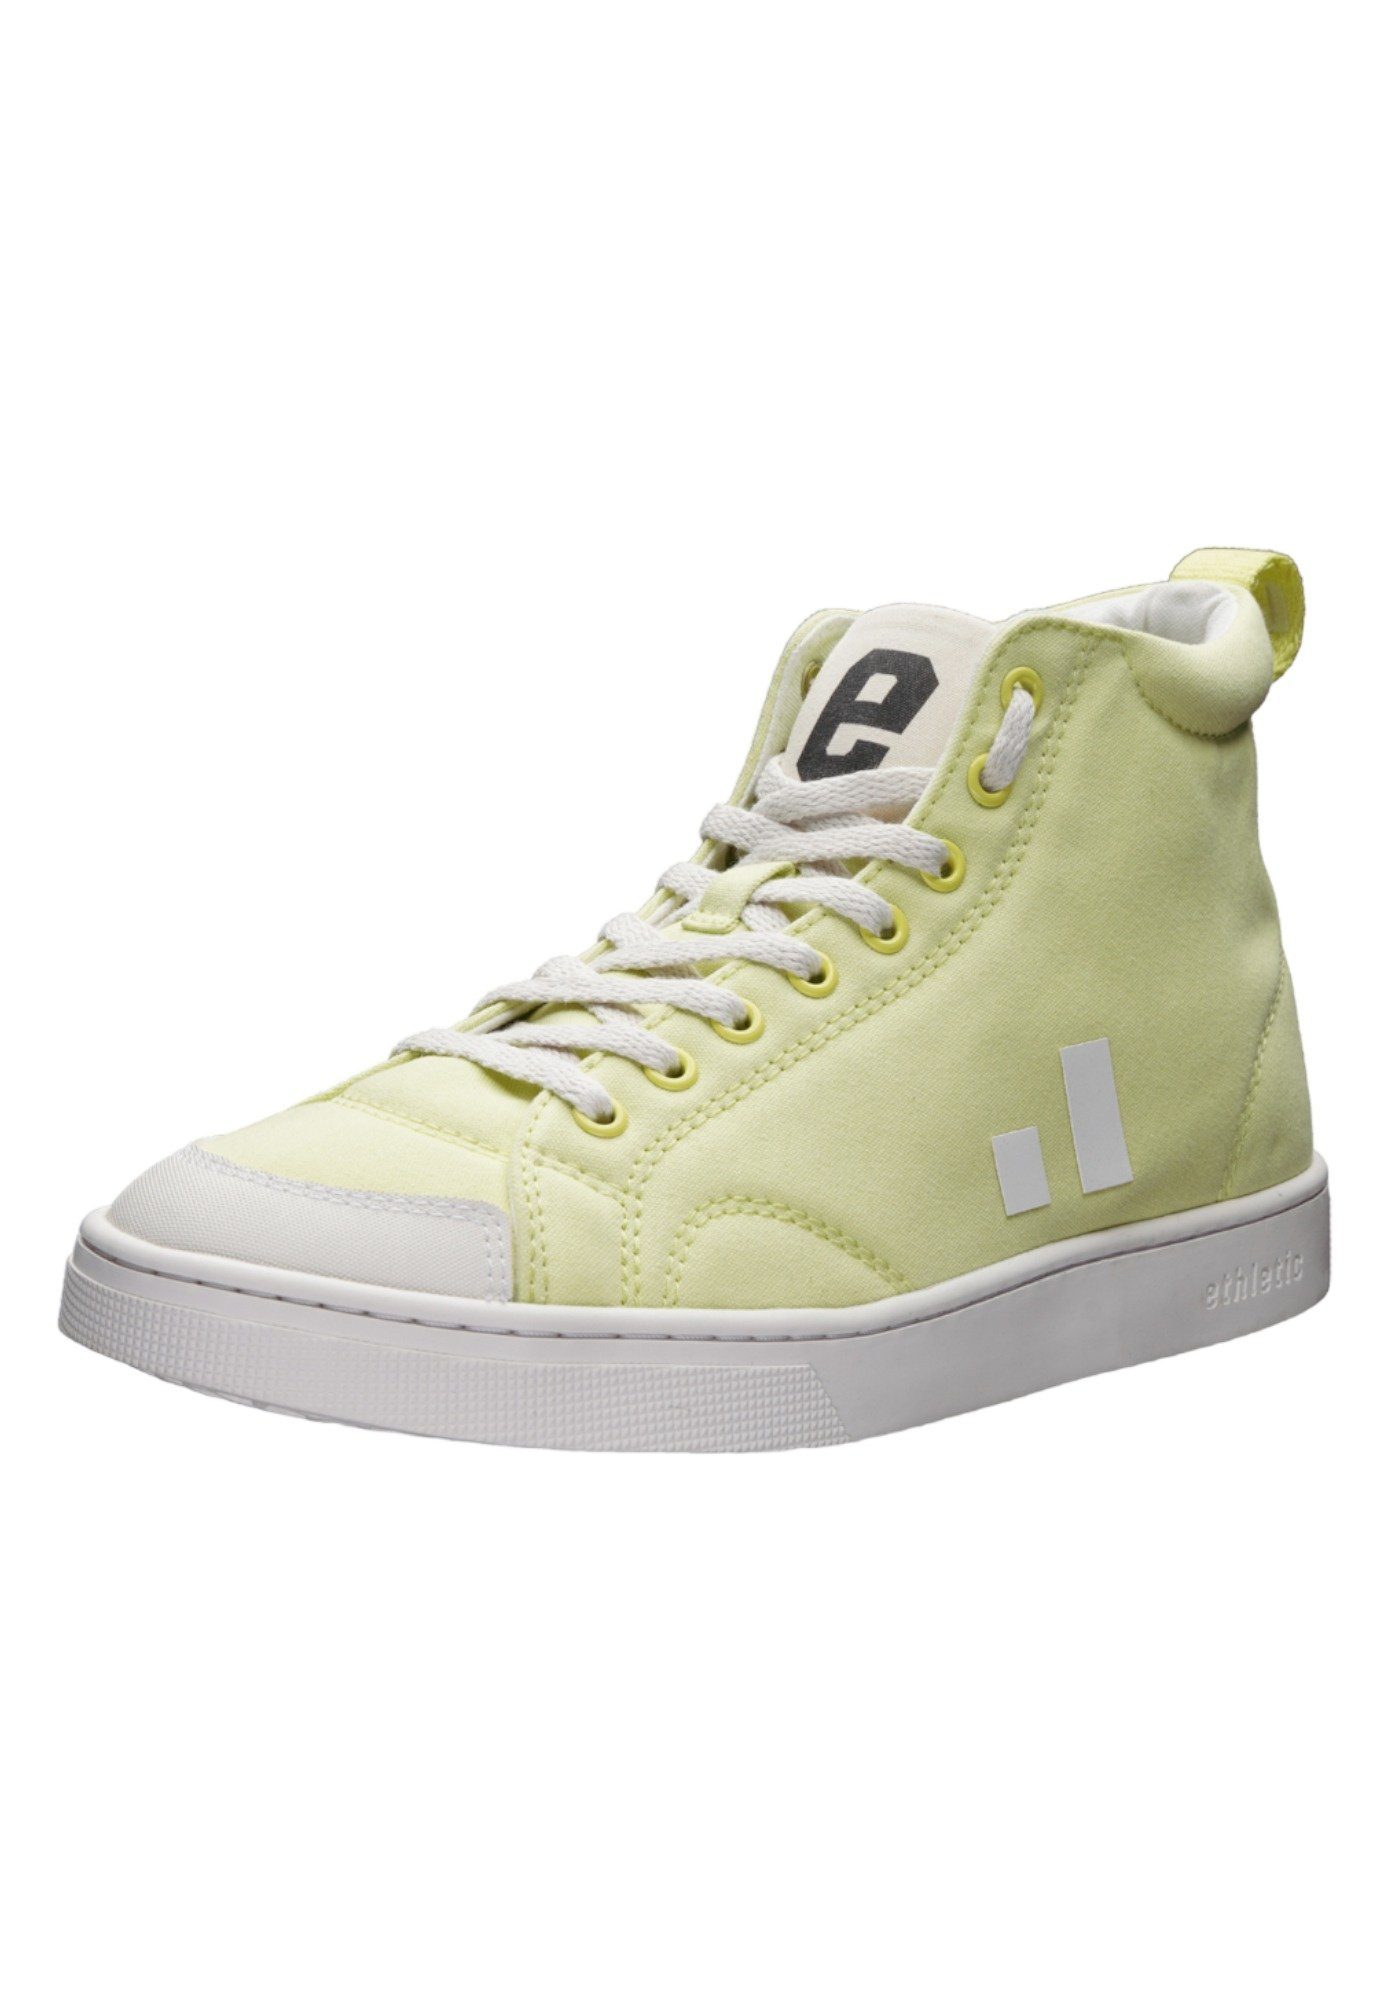 ETHLETIC Active Hi Cut Sneaker Fairtrade Produkt Lime Yellow - Just White